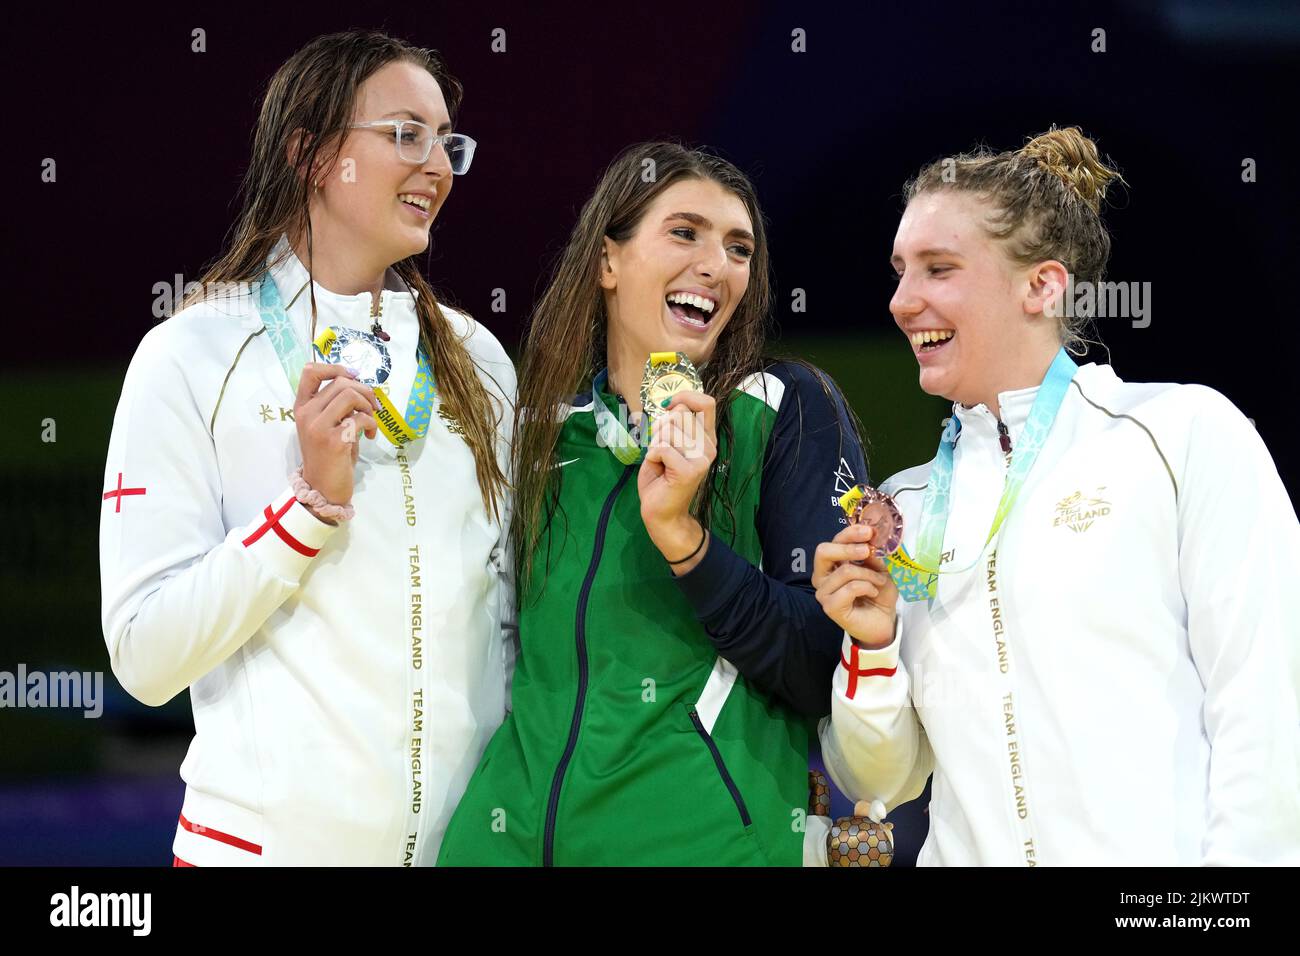 Northern Ireland's Bethany Firth (centre) with the gold medal, England's Jessica-Jane Applegate (left) with the silver medal and England's Louise Fiddes with the bronze after the Women's 200m Freestyle S14 Final at the Sandwell Aquatics Centre on day six of the 2022 Commonwealth Games in Birmingham. Picture date: Wednesday August 3, 2022. Stock Photo